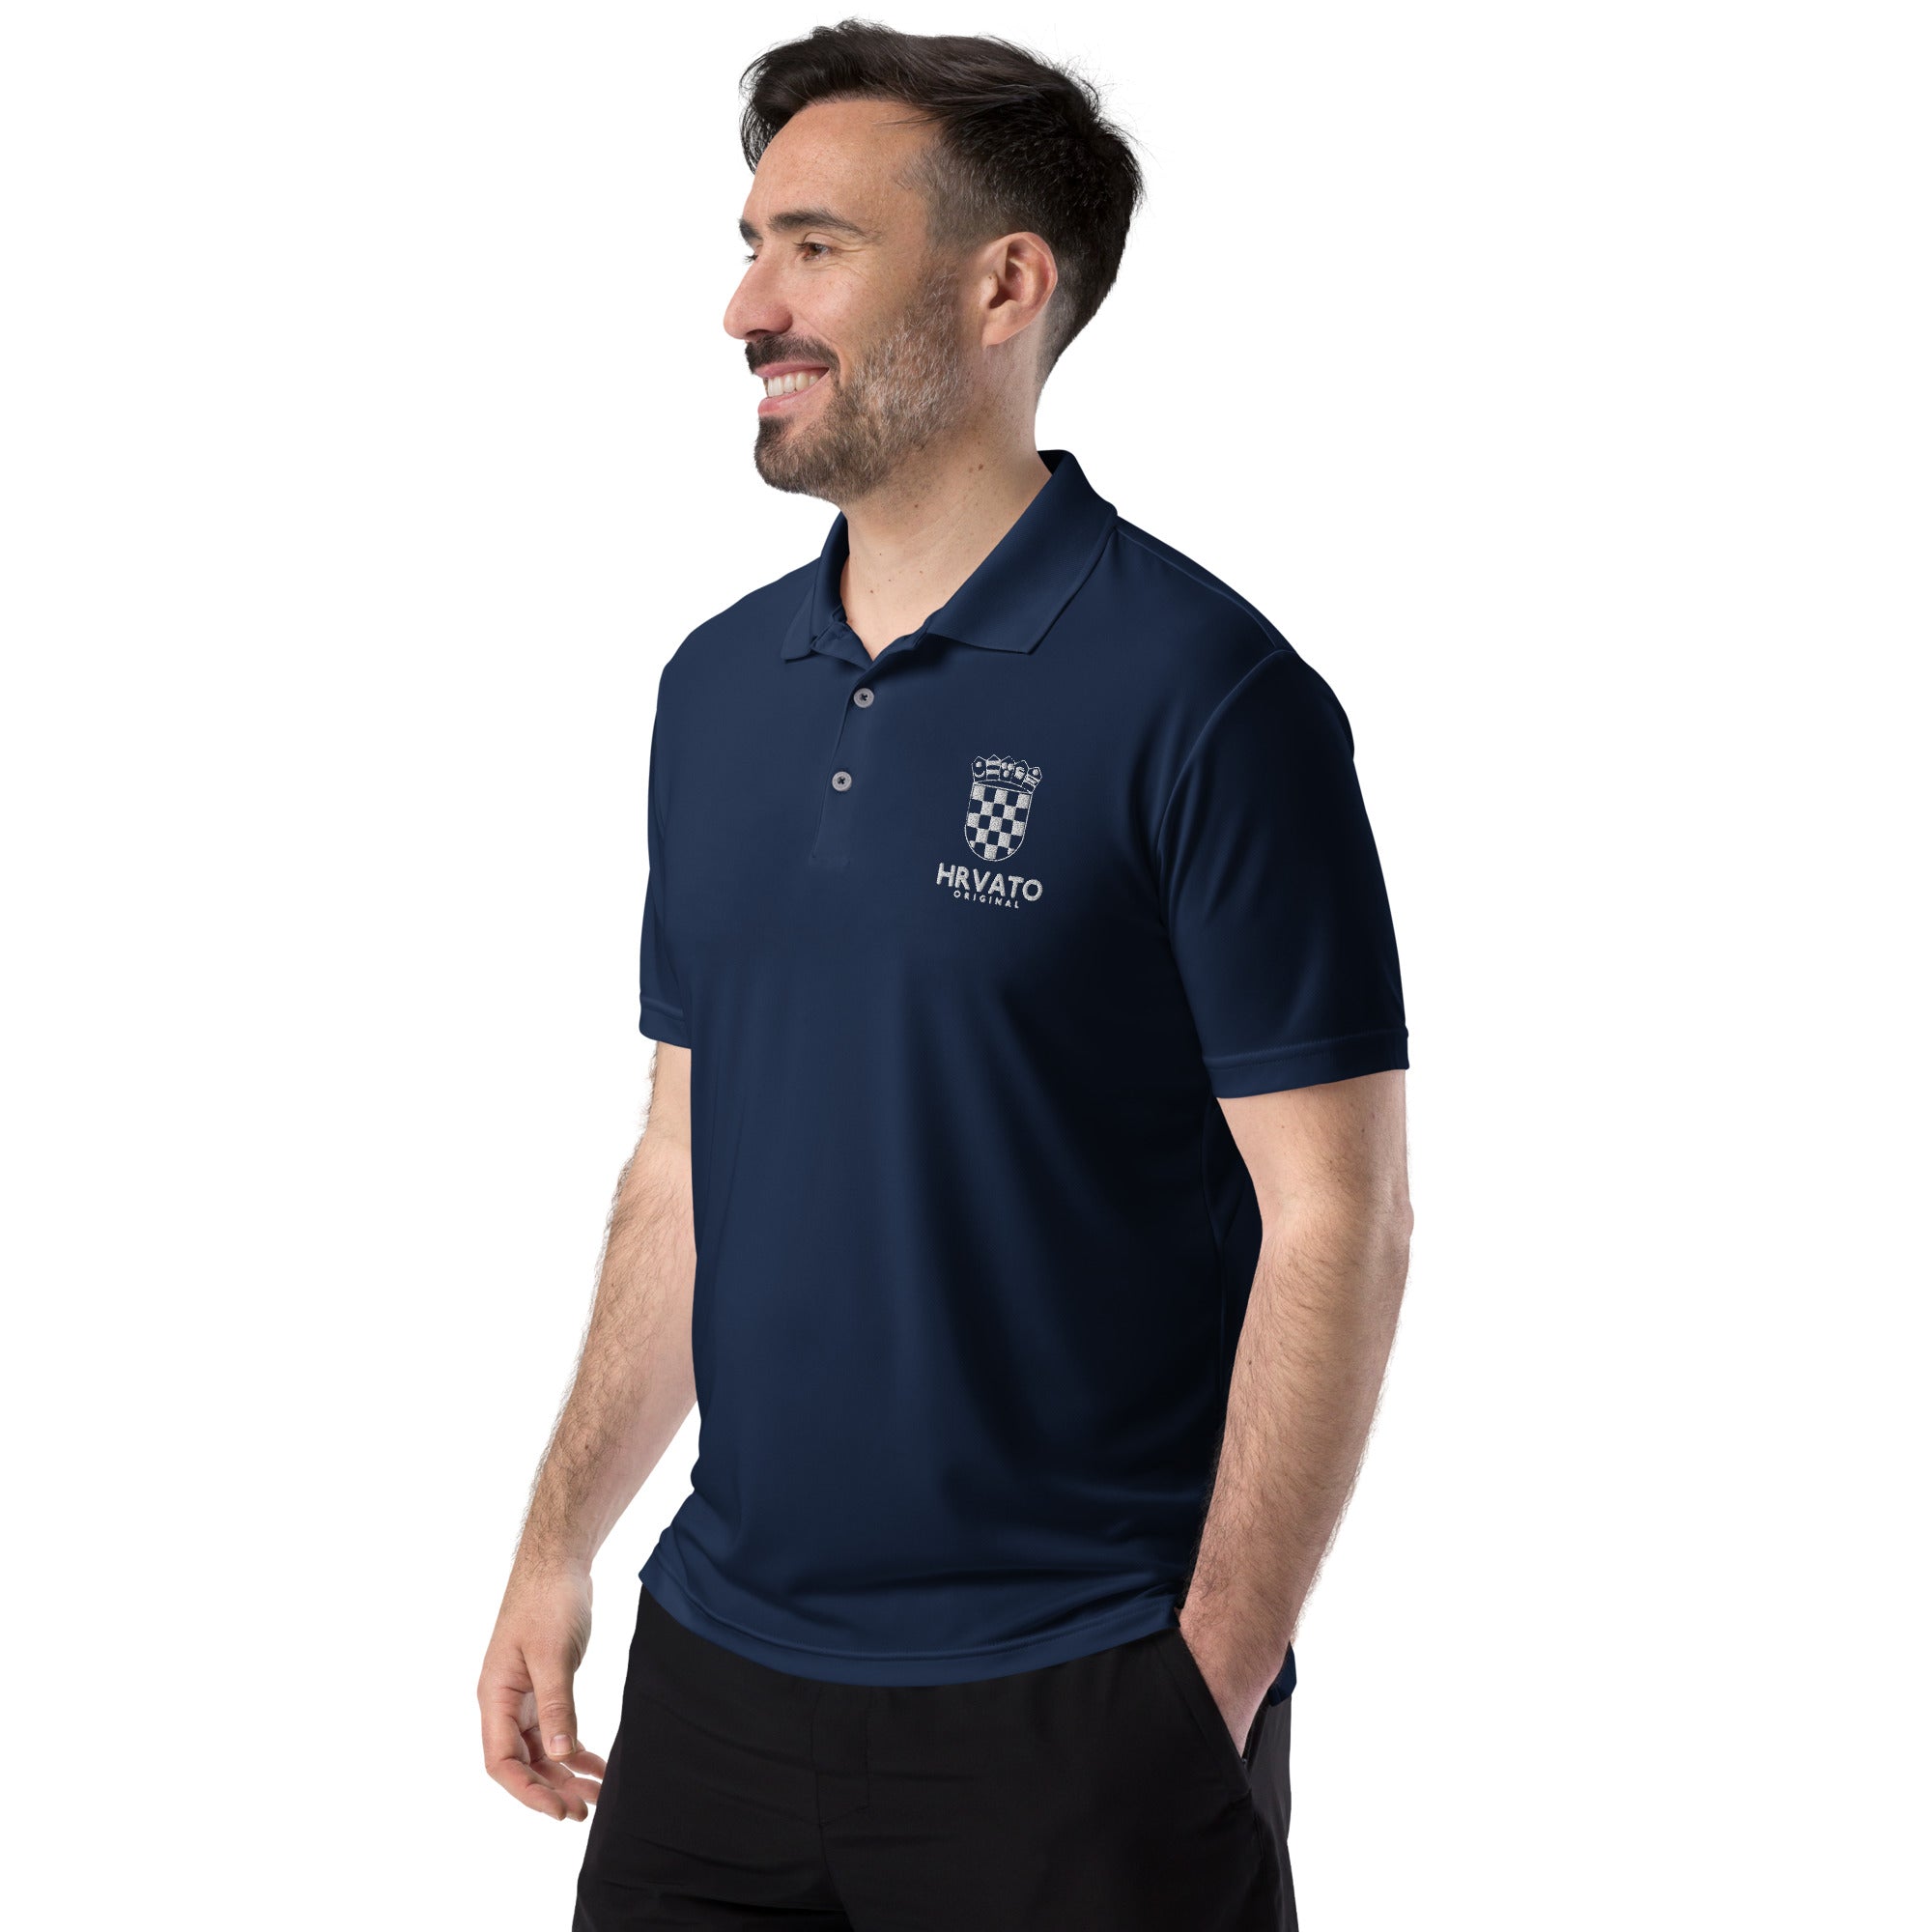 Adidas x Hrvato Polo Shirt with Croatian Coat of Arms Embroidery.